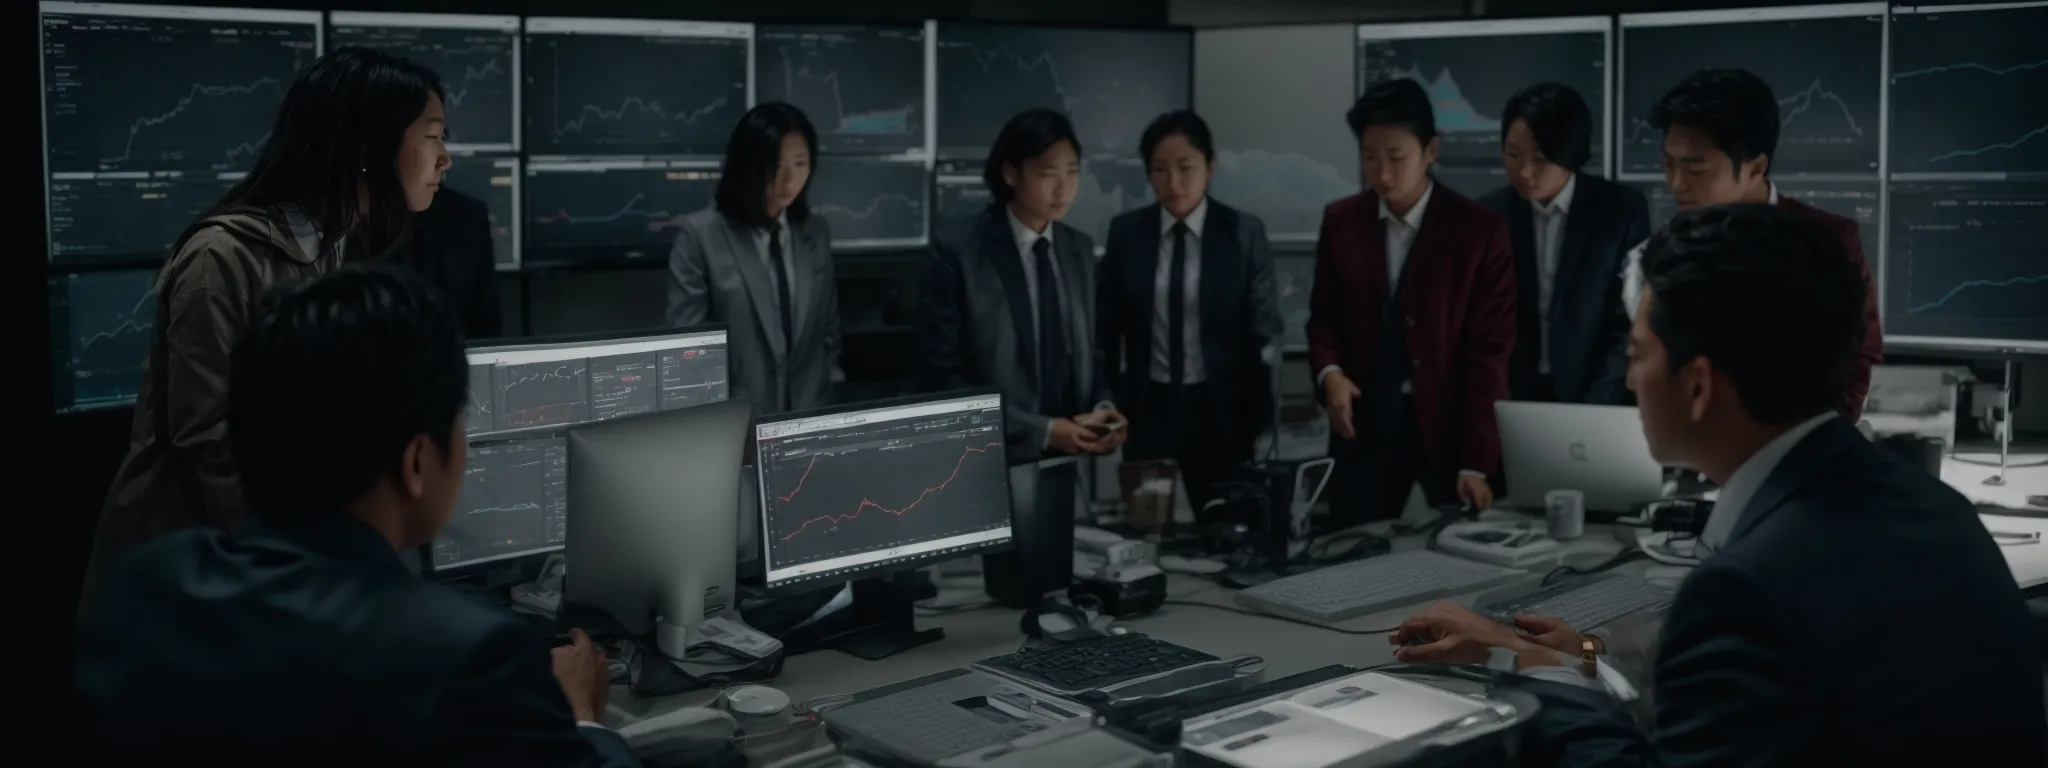 a diverse team gathered around a large computer monitor reviewing complex graphs and data analytics dashboards.